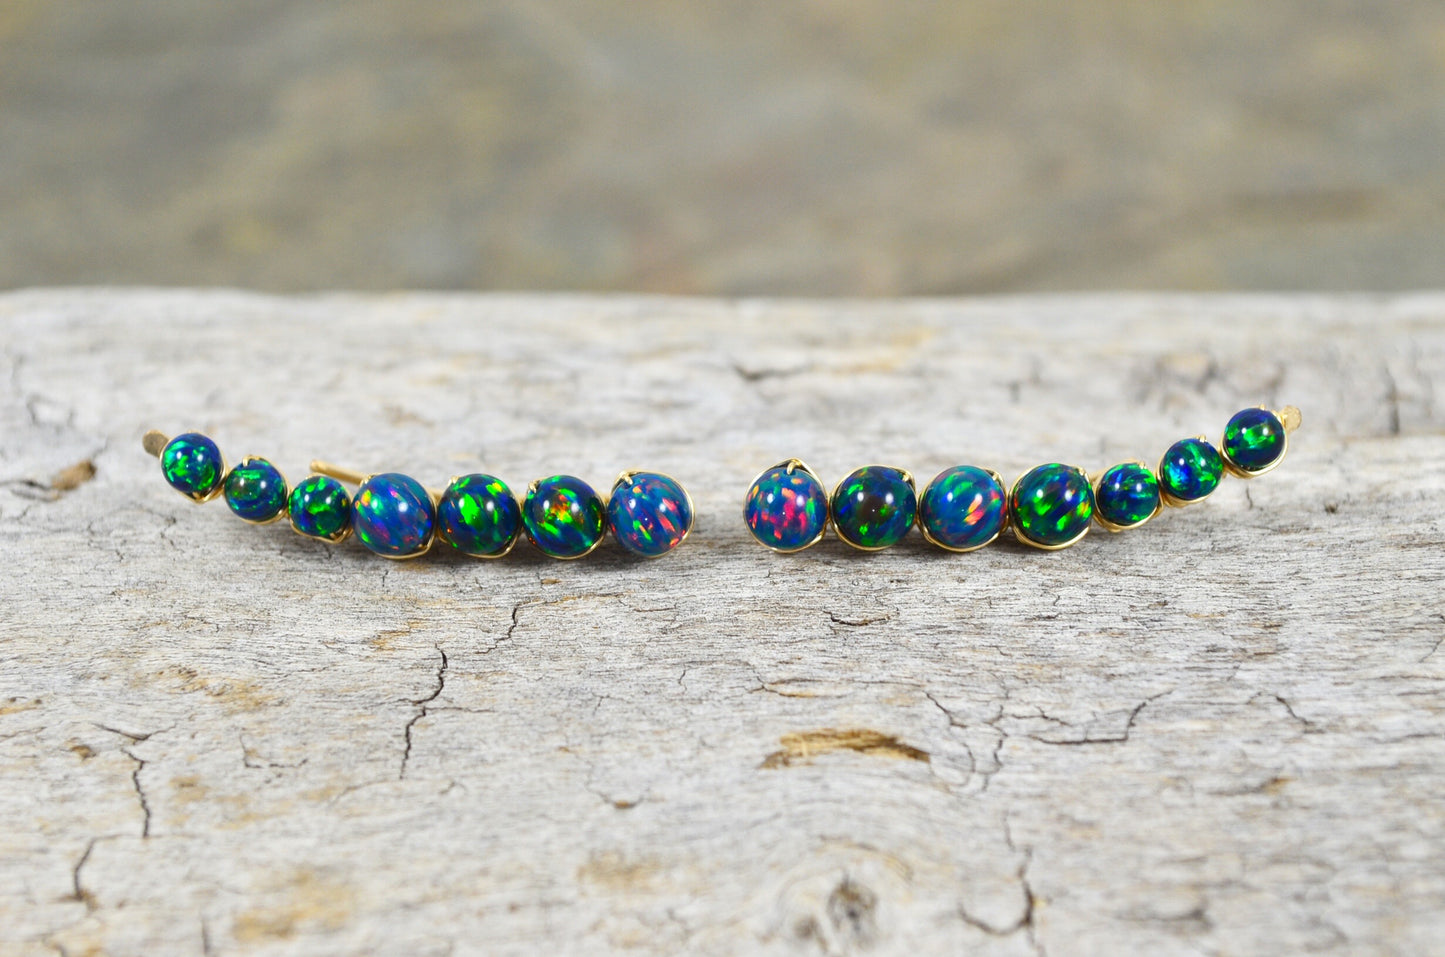 Black Opal Ear Climbers, in Sterling Silver or 14k Gold Filled